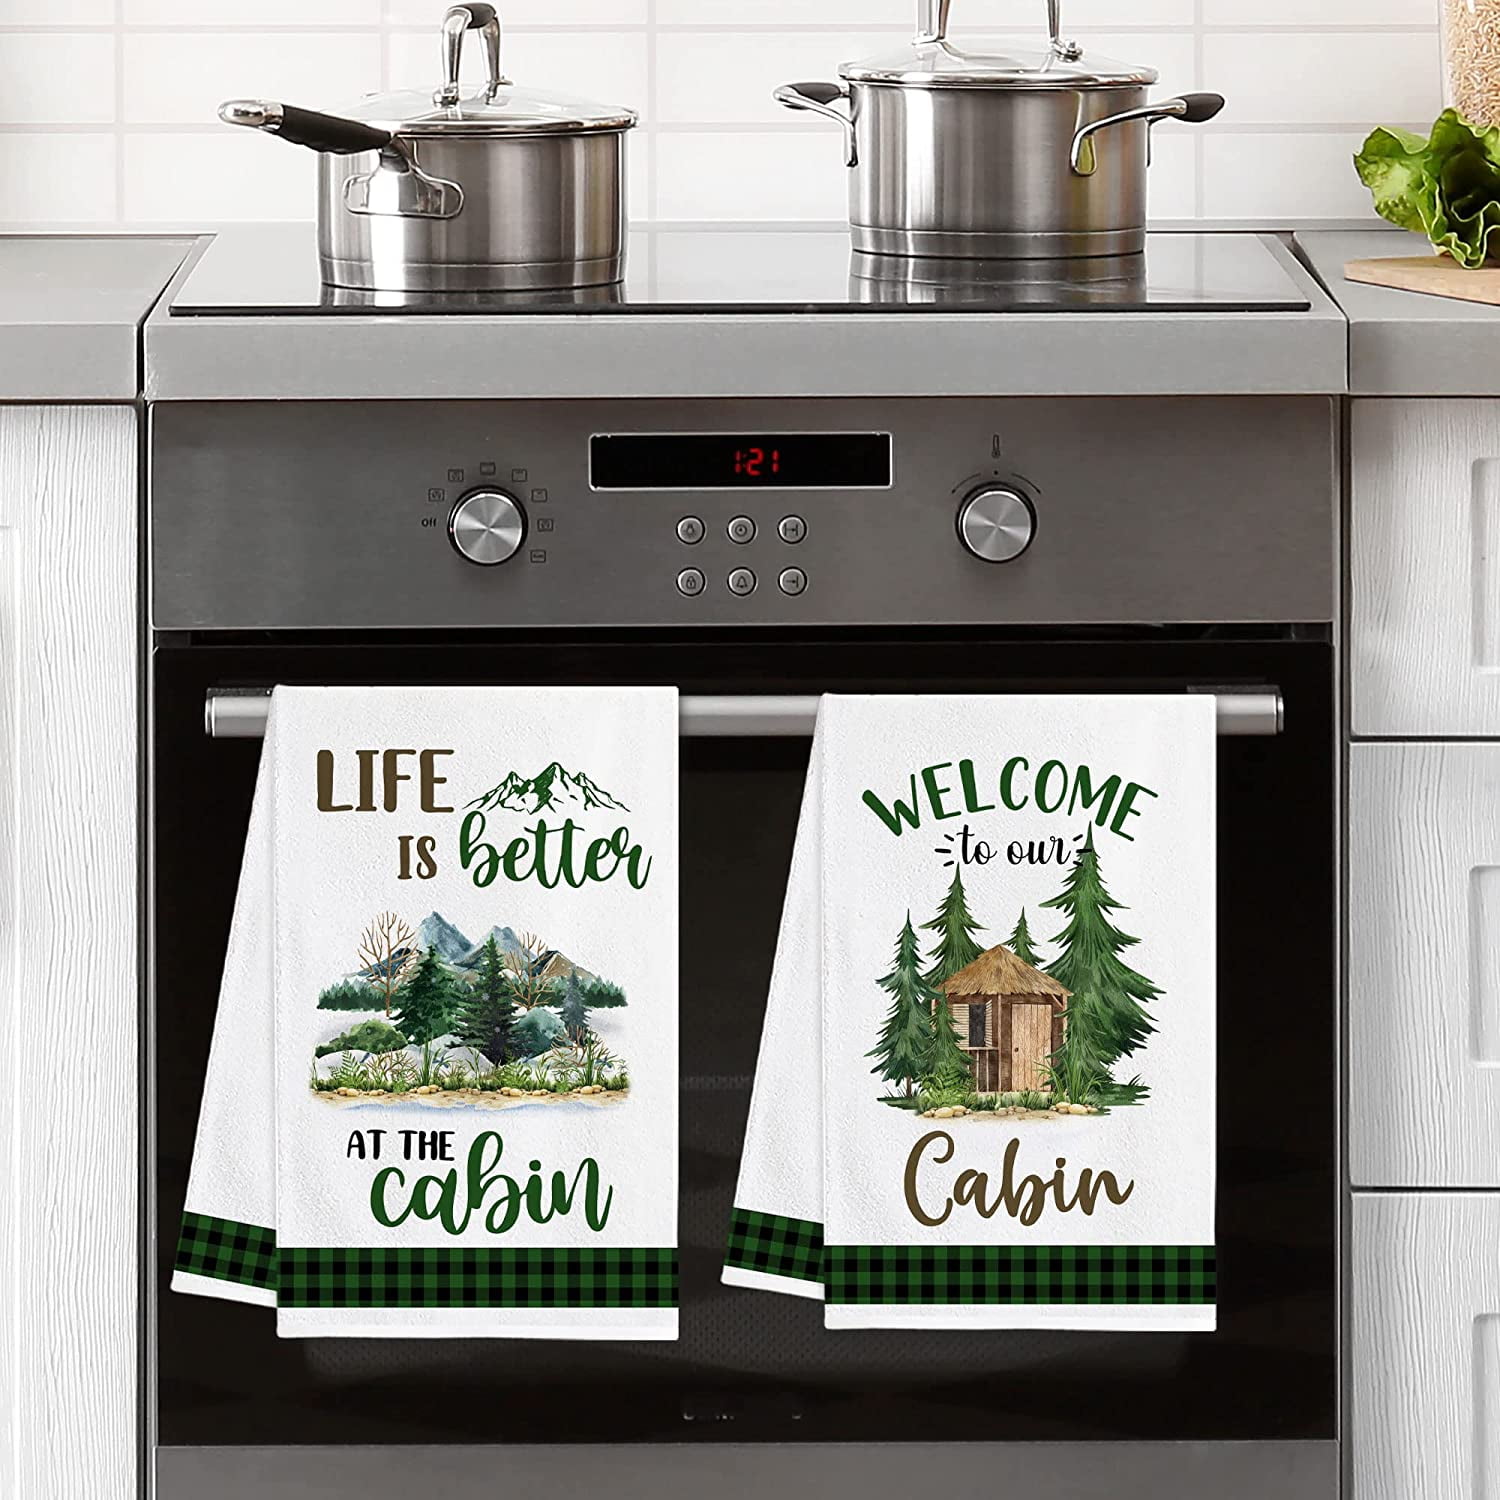 3 Cabin Lodge Themed Decorative Cotton Kitchen Towels Set | 2 Towels with  Bear, Moose, Deer, Pine Trees, Paw Print and 1 Plaid Towel for Dish and  Hand